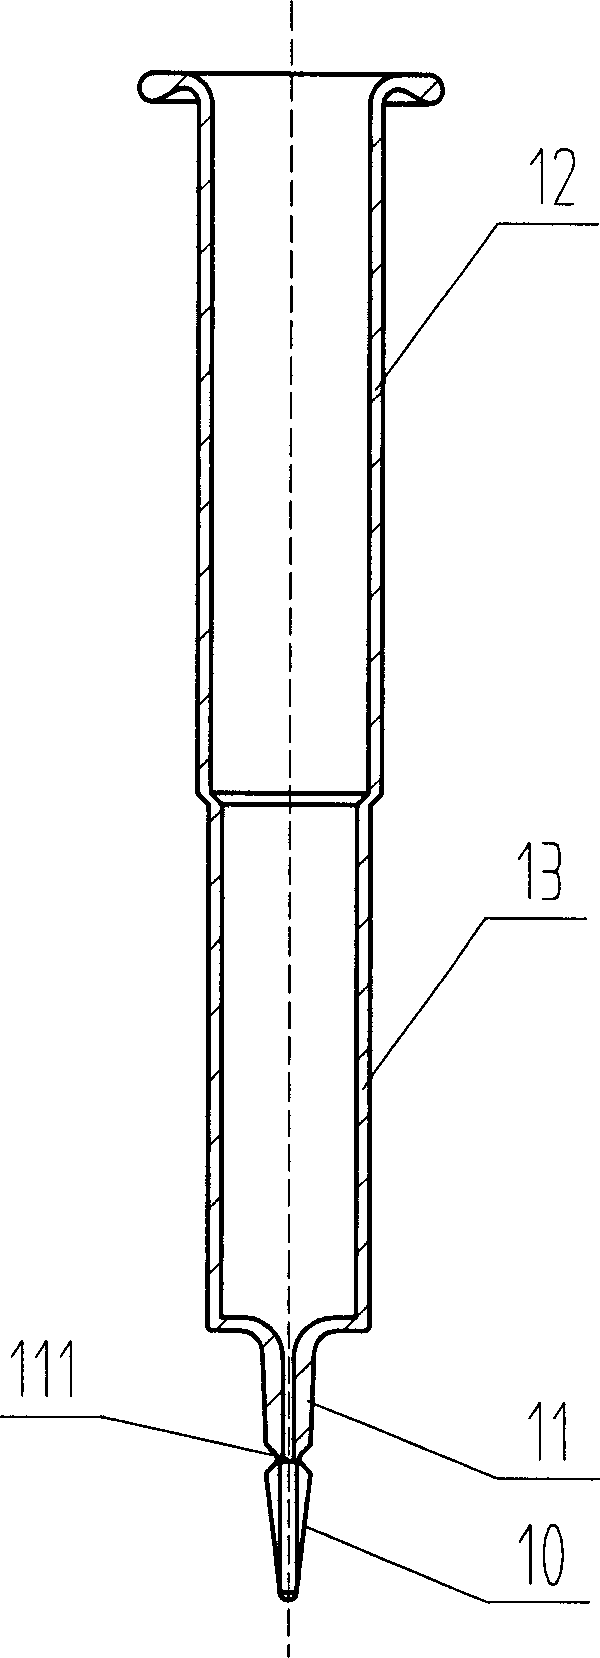 Two-chamber prefilled syringe and its prefilling method